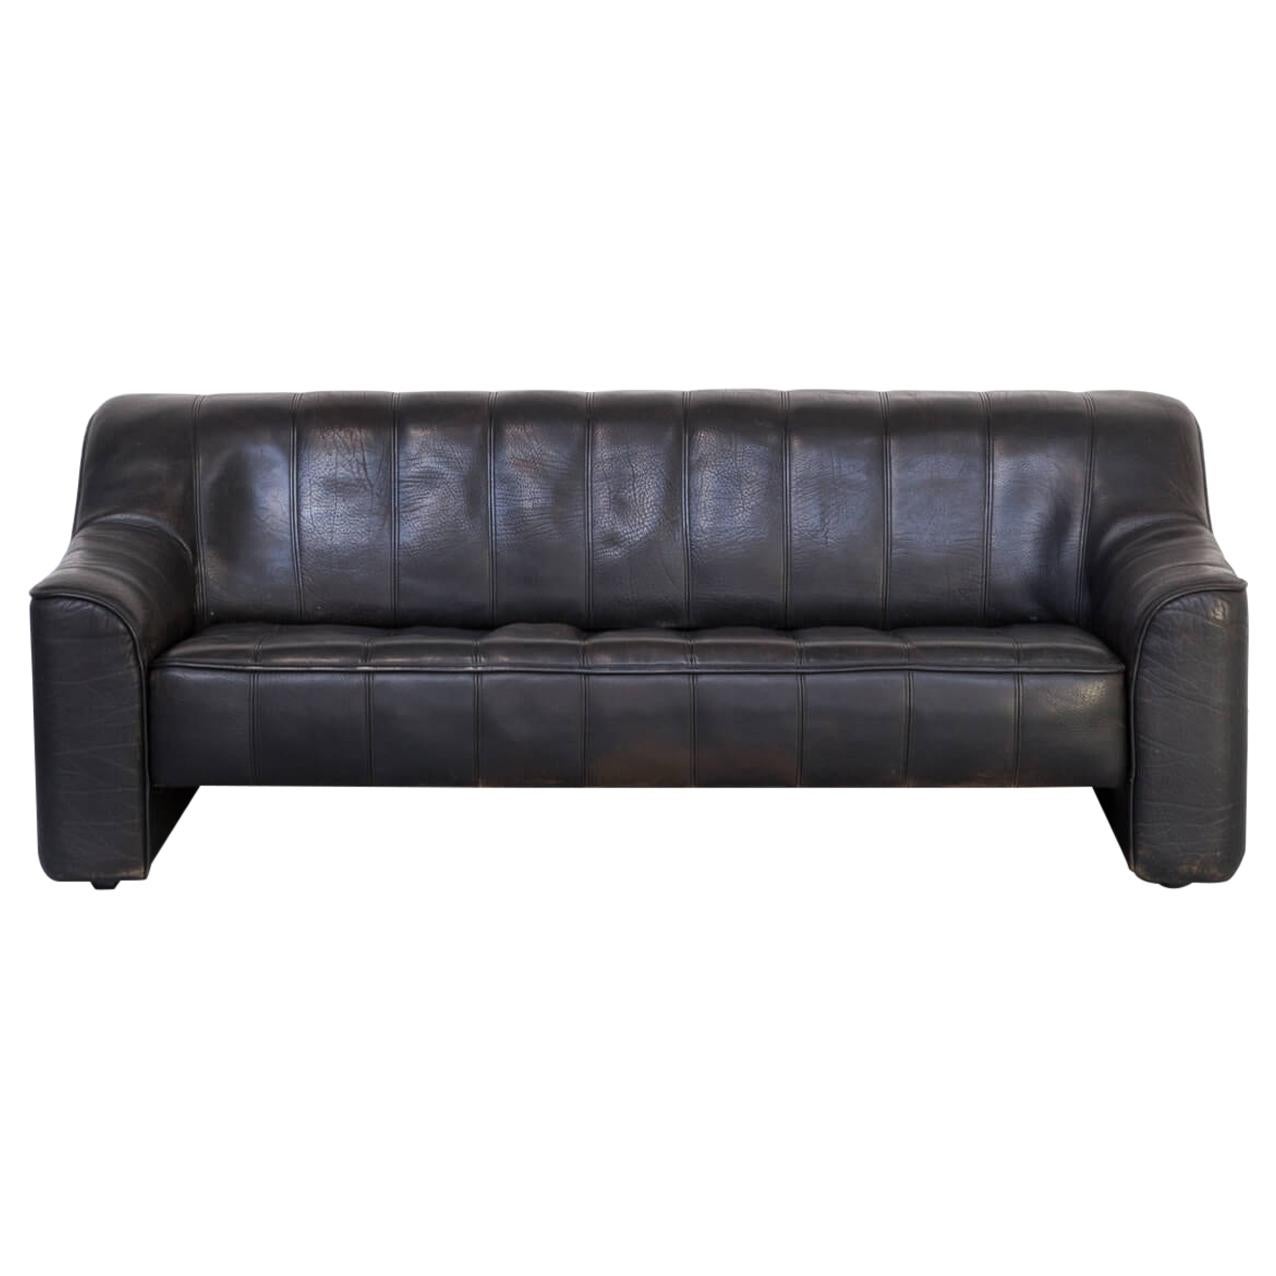 1970s Leather 3-Seat Sofa ‘Model DS 44’ for De Sede